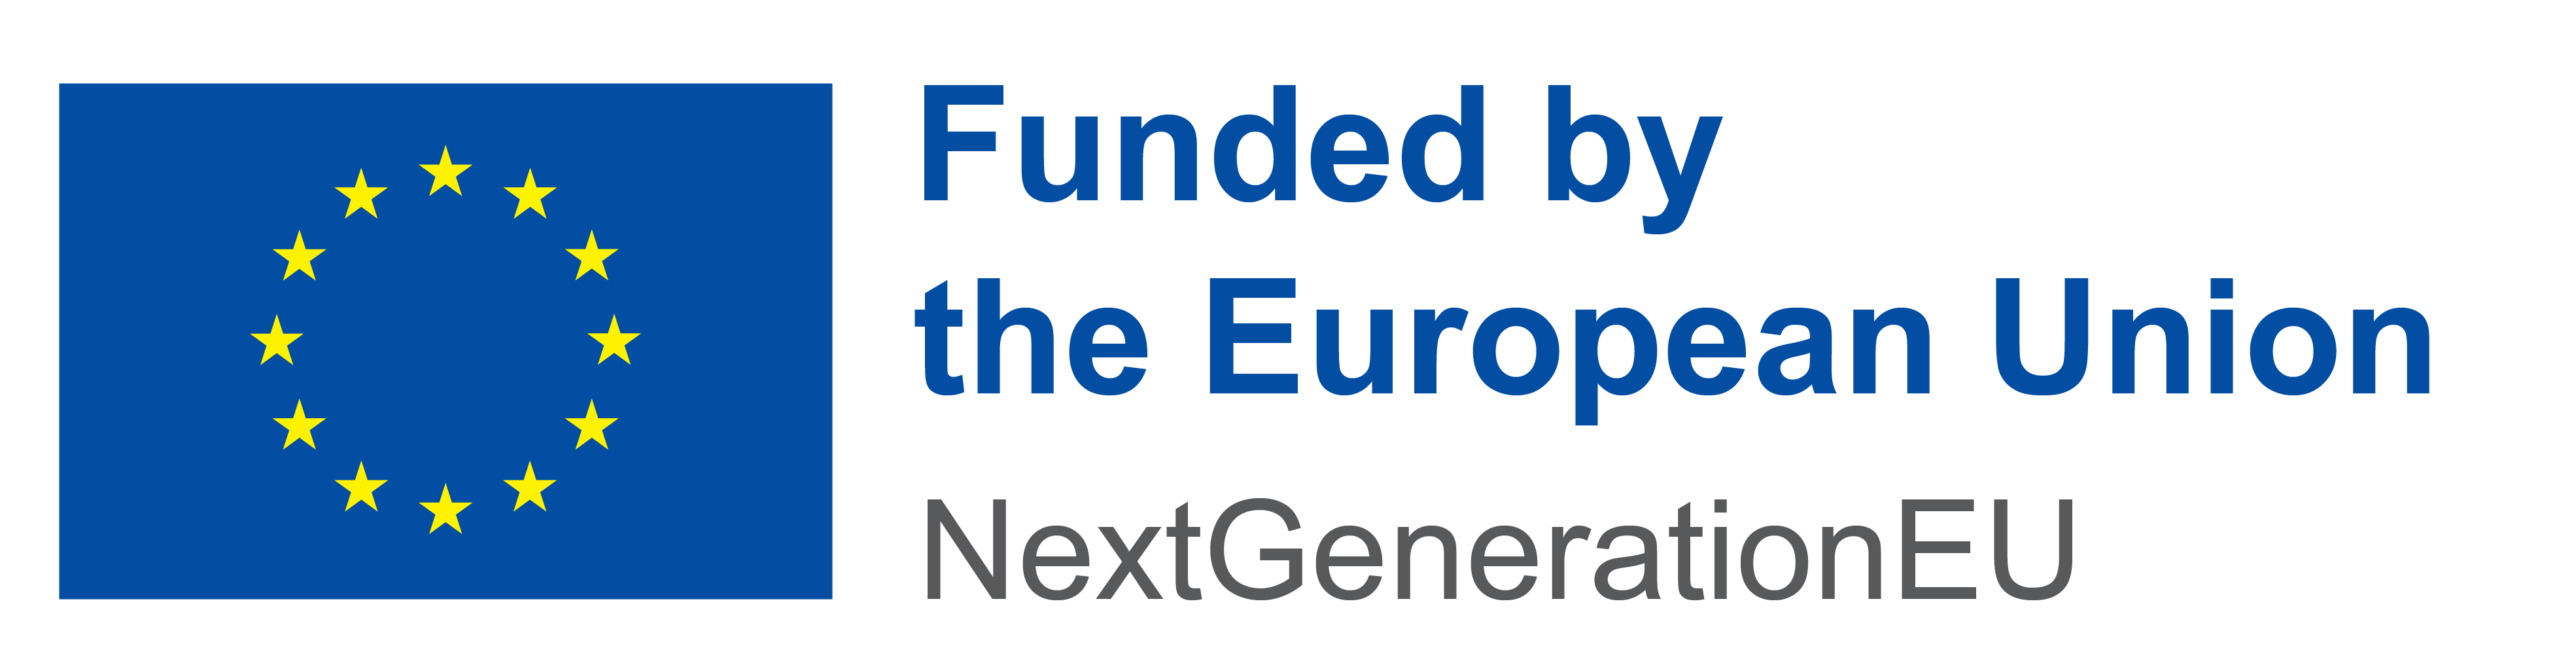 Funded by the European Union: Next Generation EU.